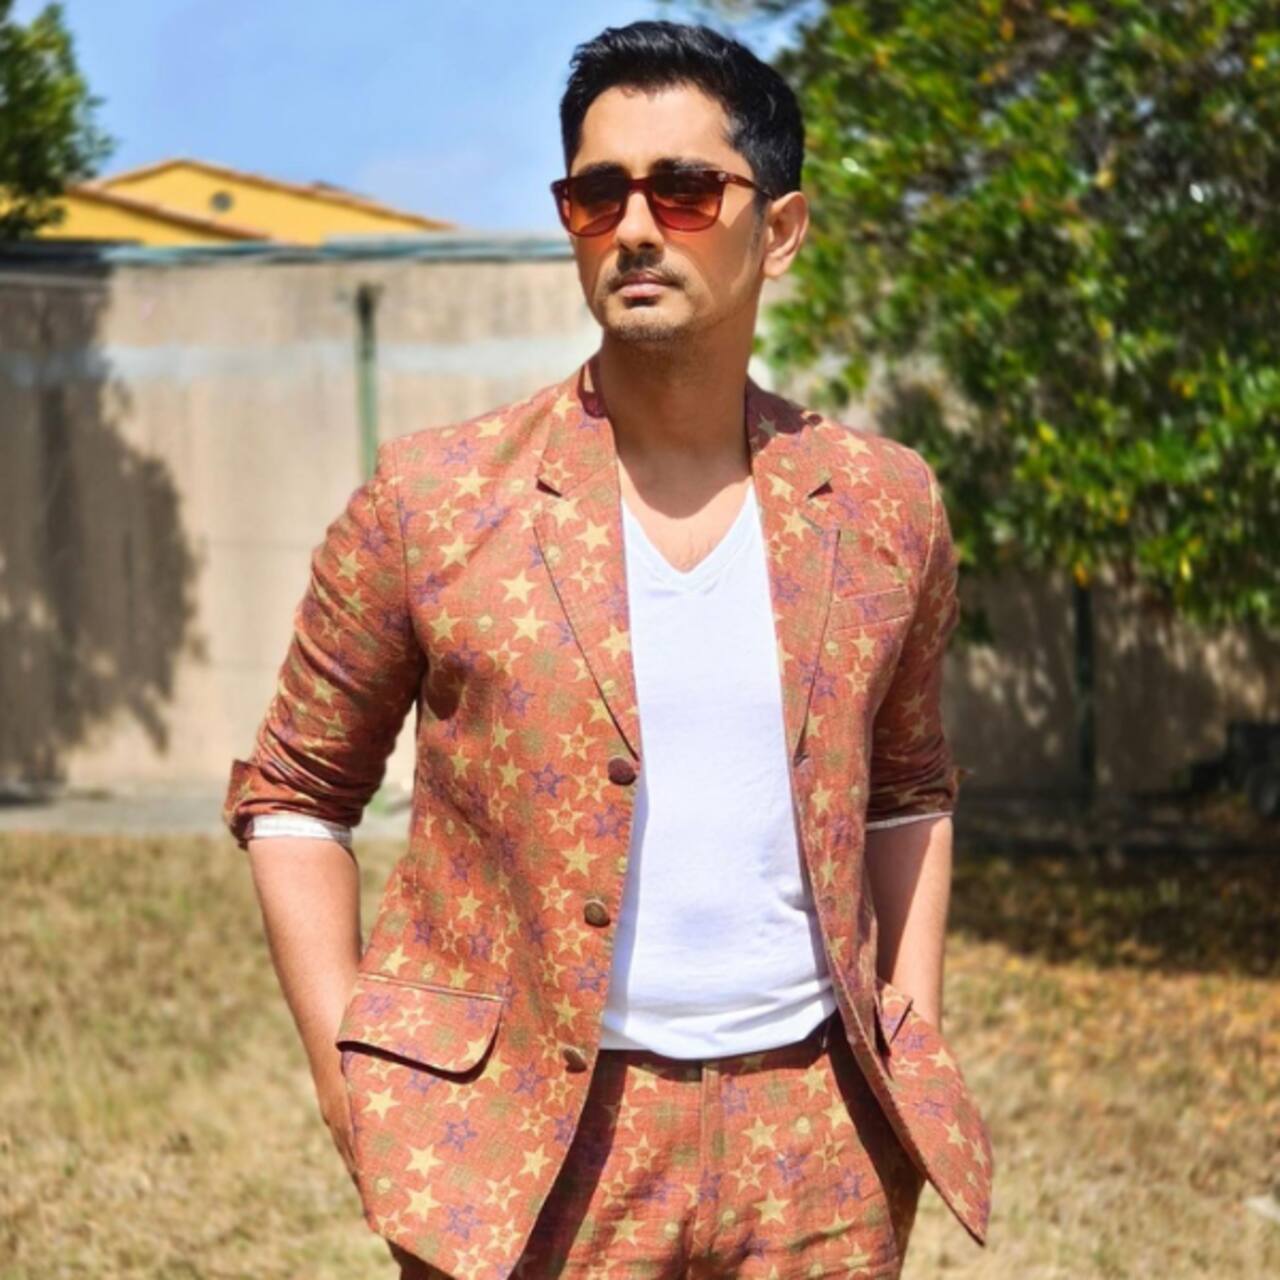 Siddharth shares that his parents were harassed at Madurai Airport